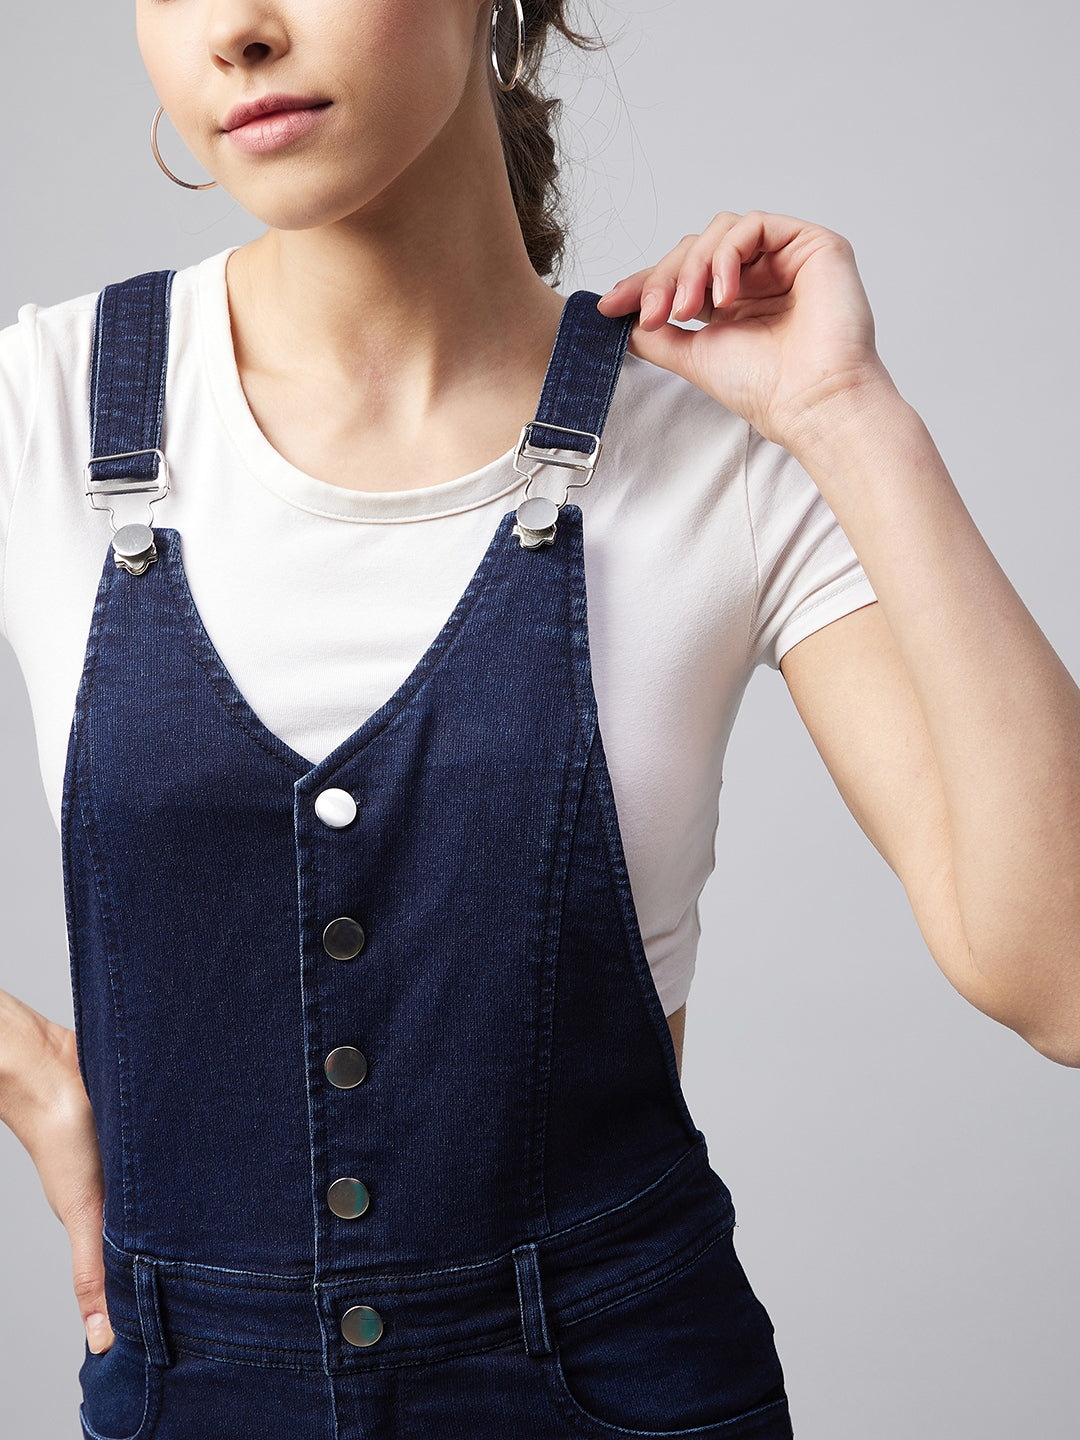 Navy-Blue-Denim-Lycra-Dungaree-(T-Shirt-Not-Included)